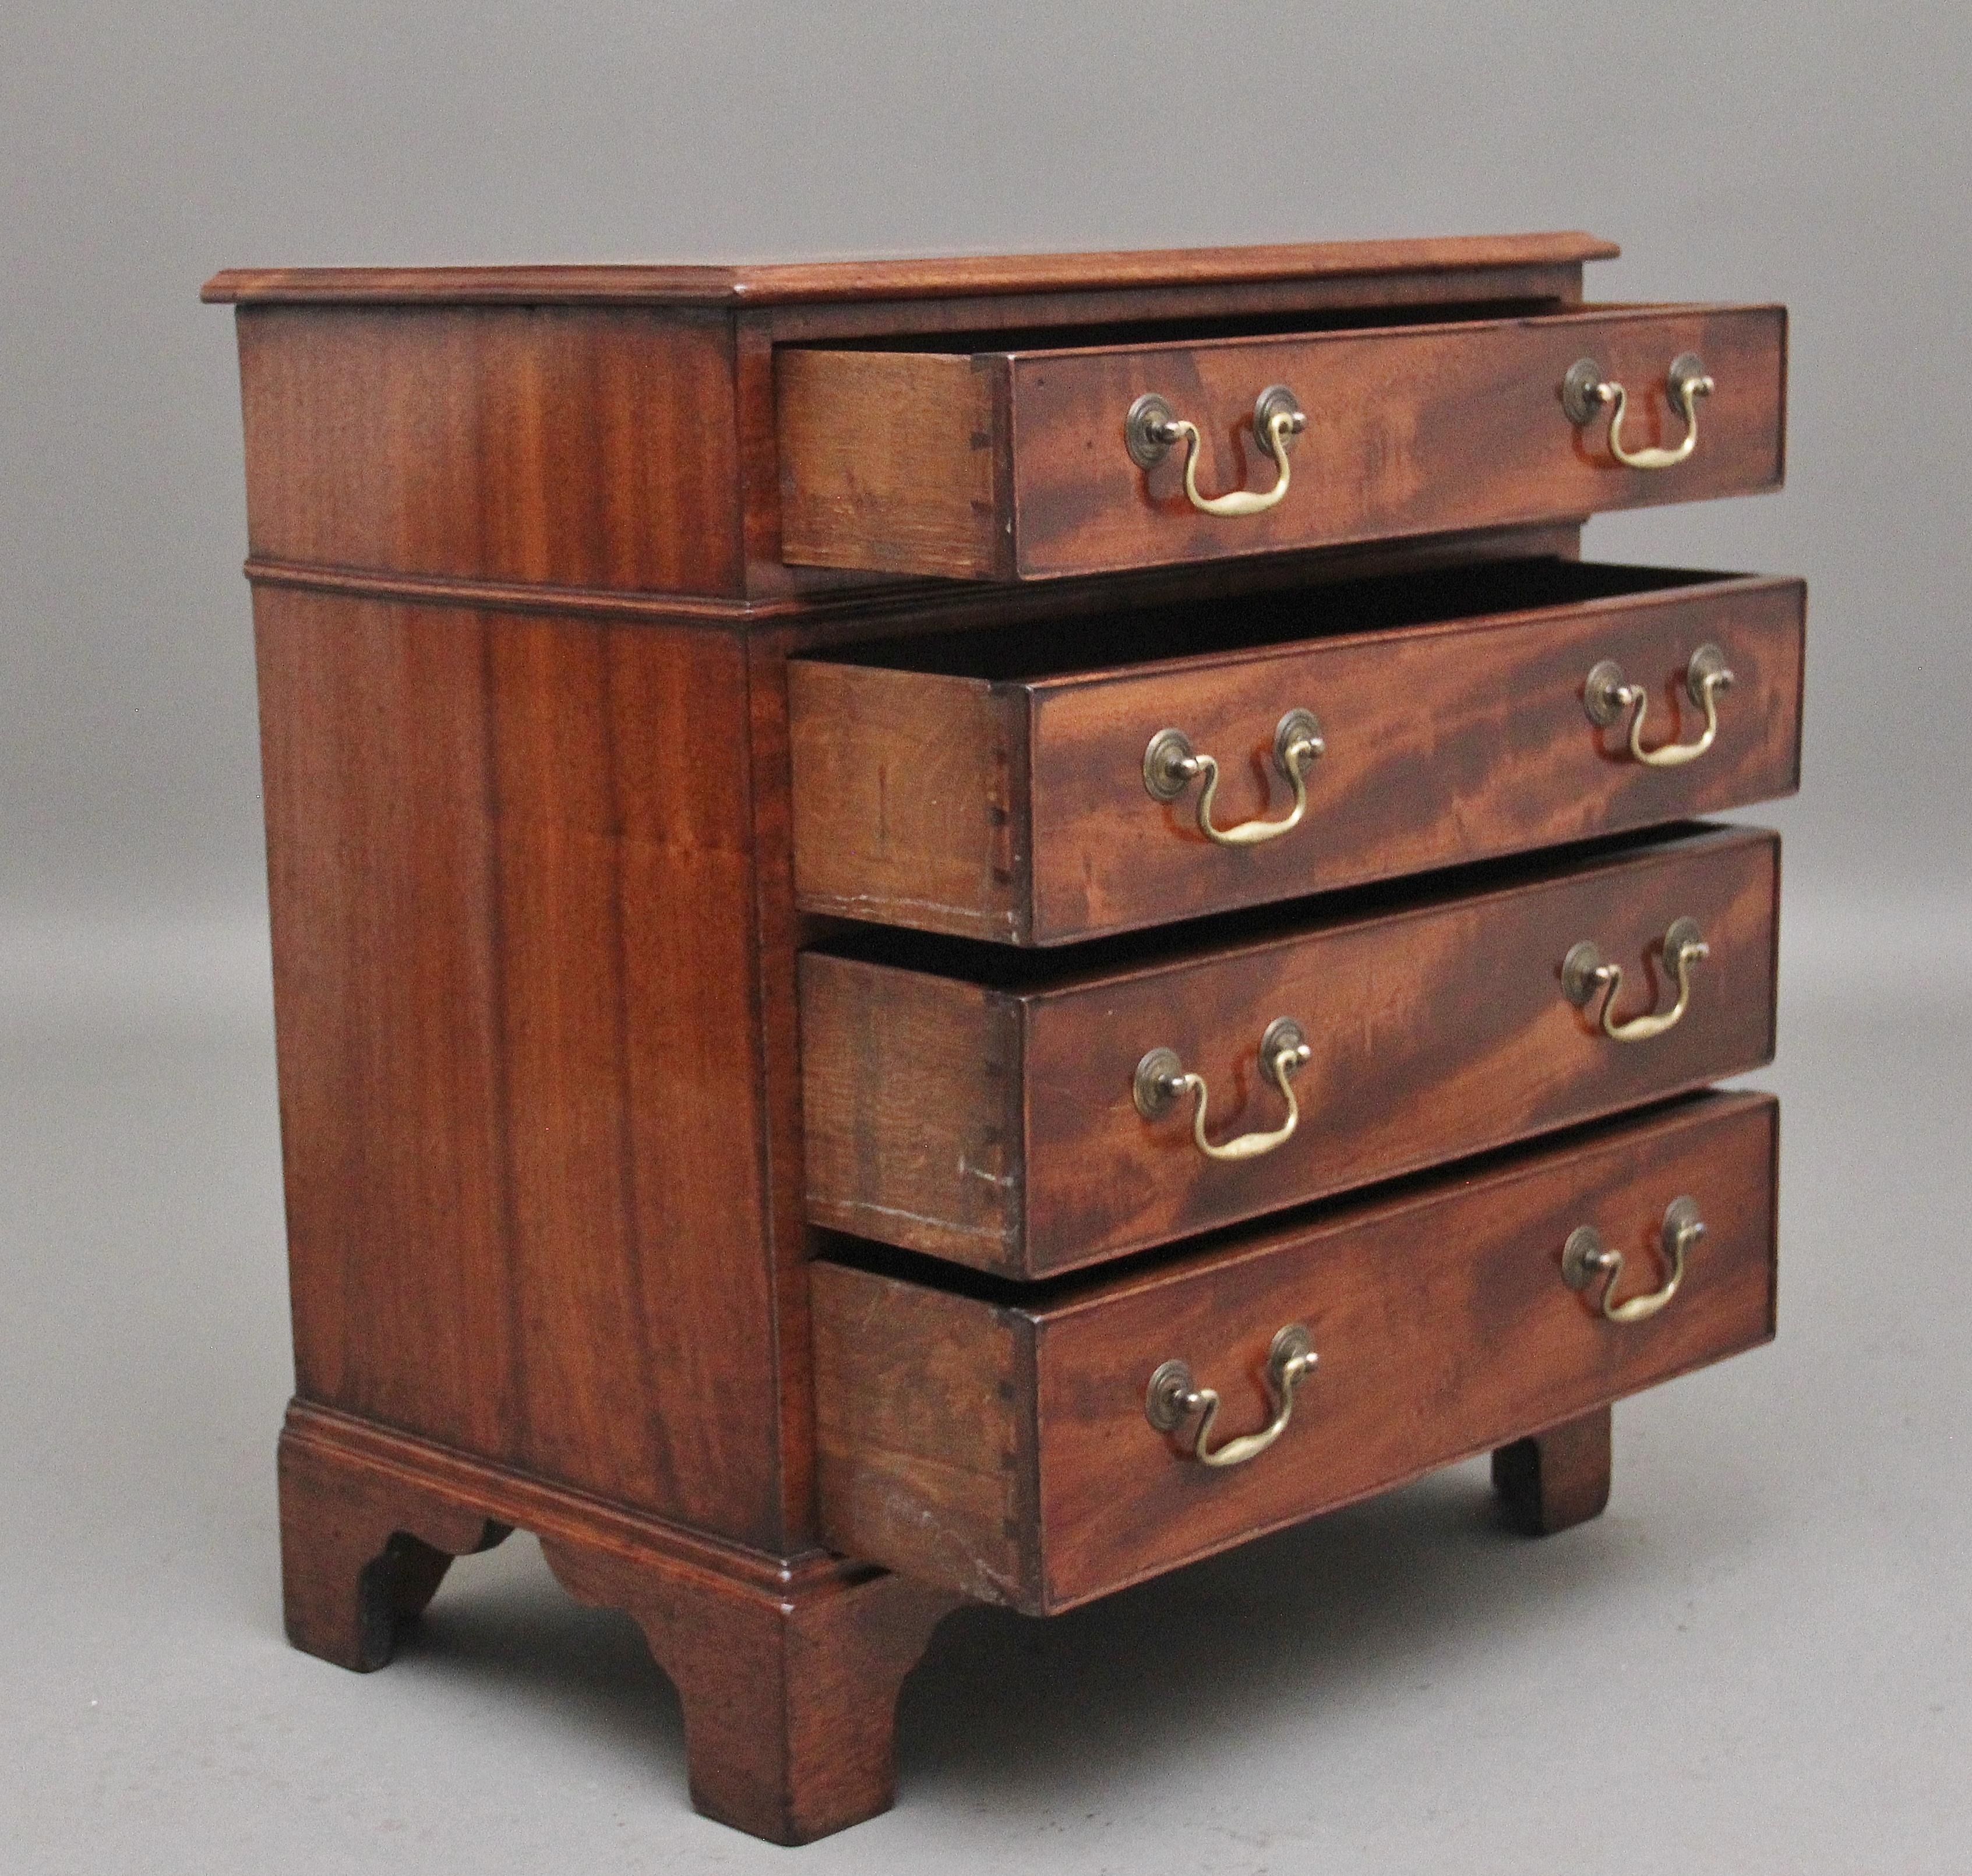 Early Victorian Mid 19th Century mahogany bedside chest of drawers